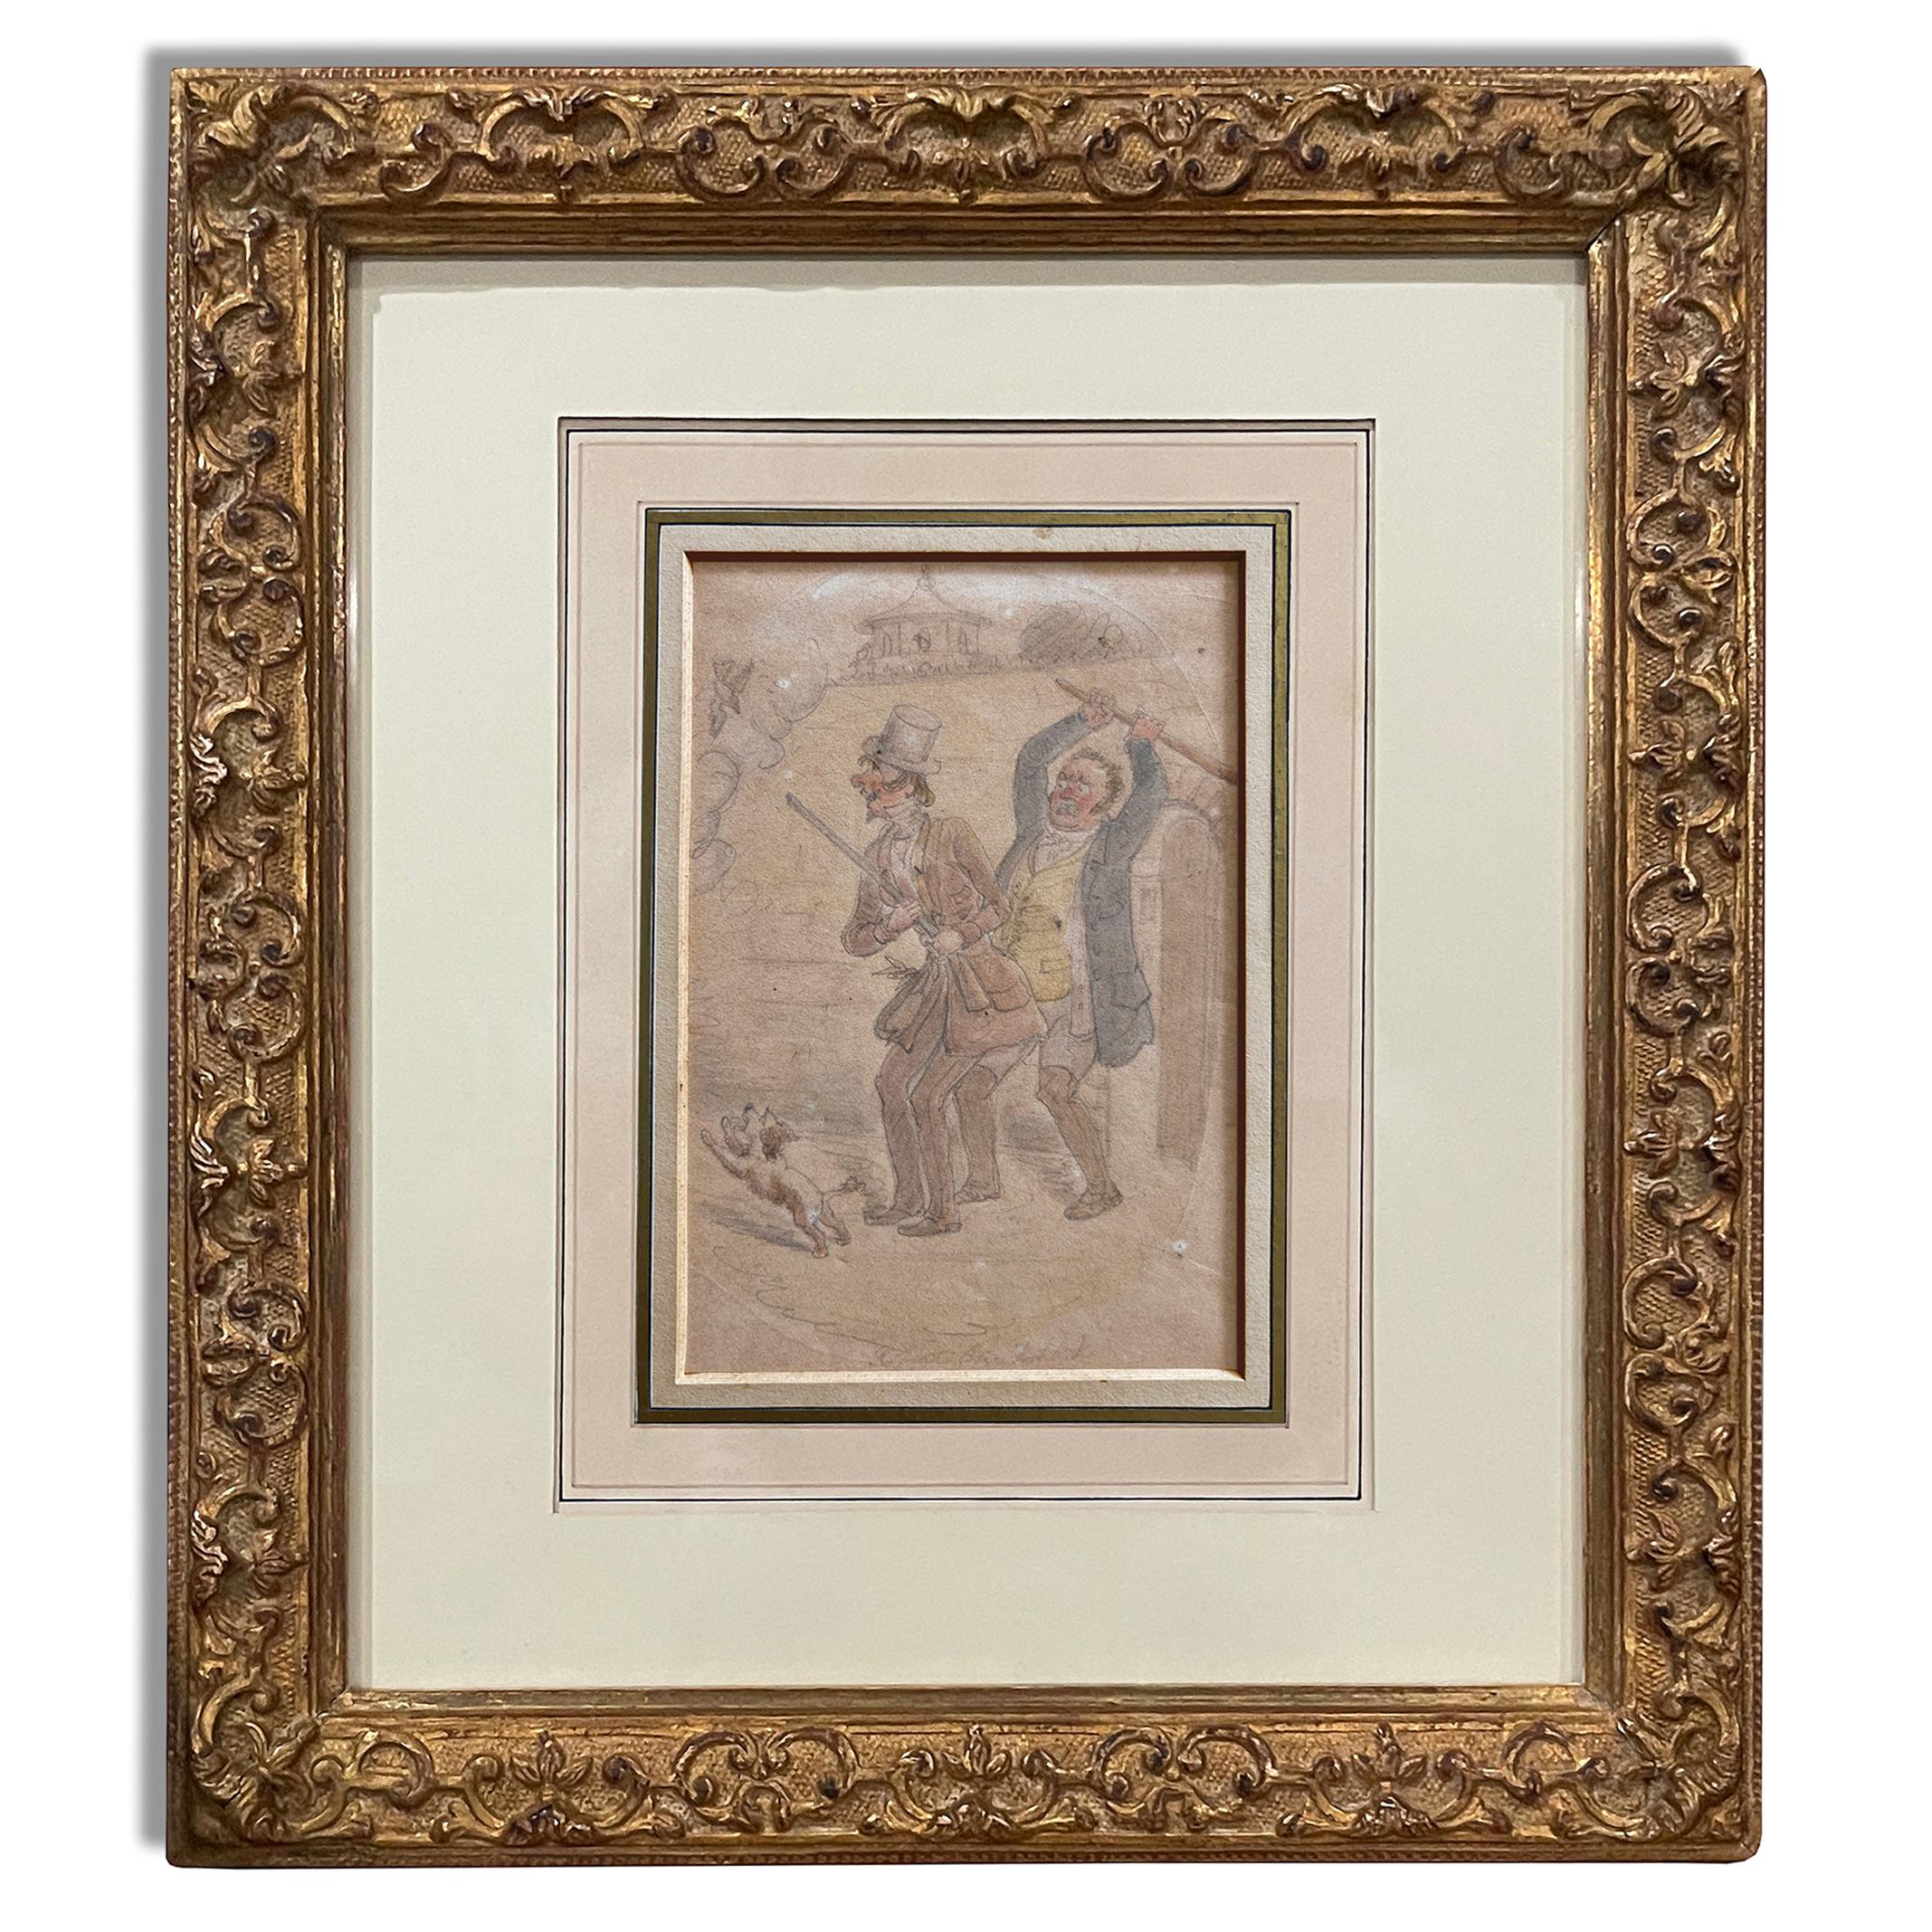 Robert Isaac CRUIKSHANK (1789-1856)
Drawing, watercolor and charcoal pencil on paper depicting a scene of Anti-Hunting…
Signed bottom center, and marked on the backside, Robert CRUIKSHANK.
Framed into a beautiful gilt carved frame, and